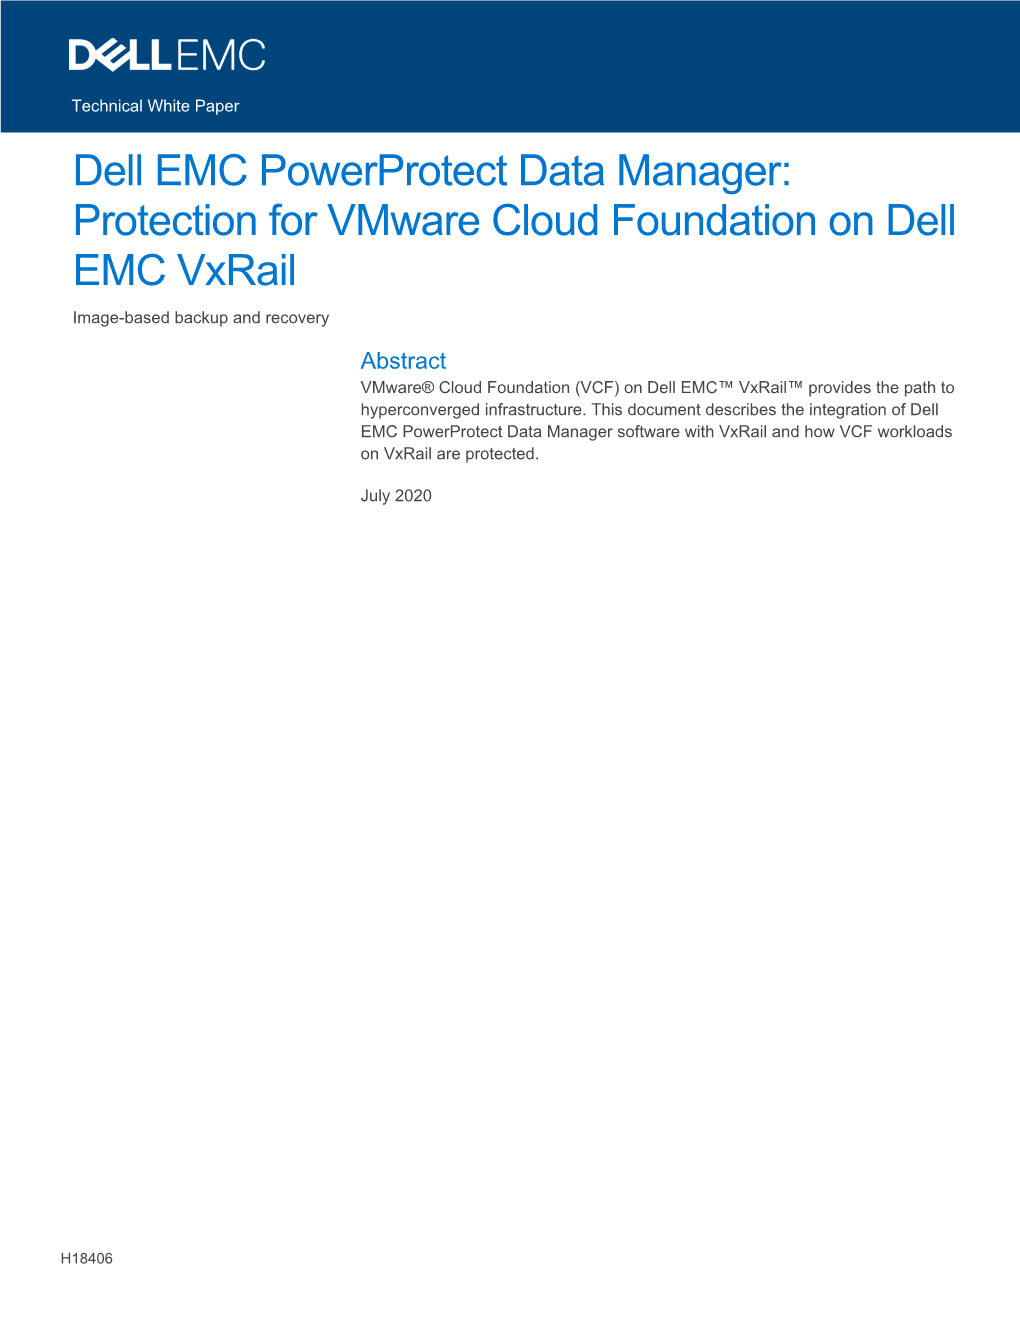 Protection for Vmware Cloud Foundation on Dell EMC Vxrail Image-Based Backup and Recovery